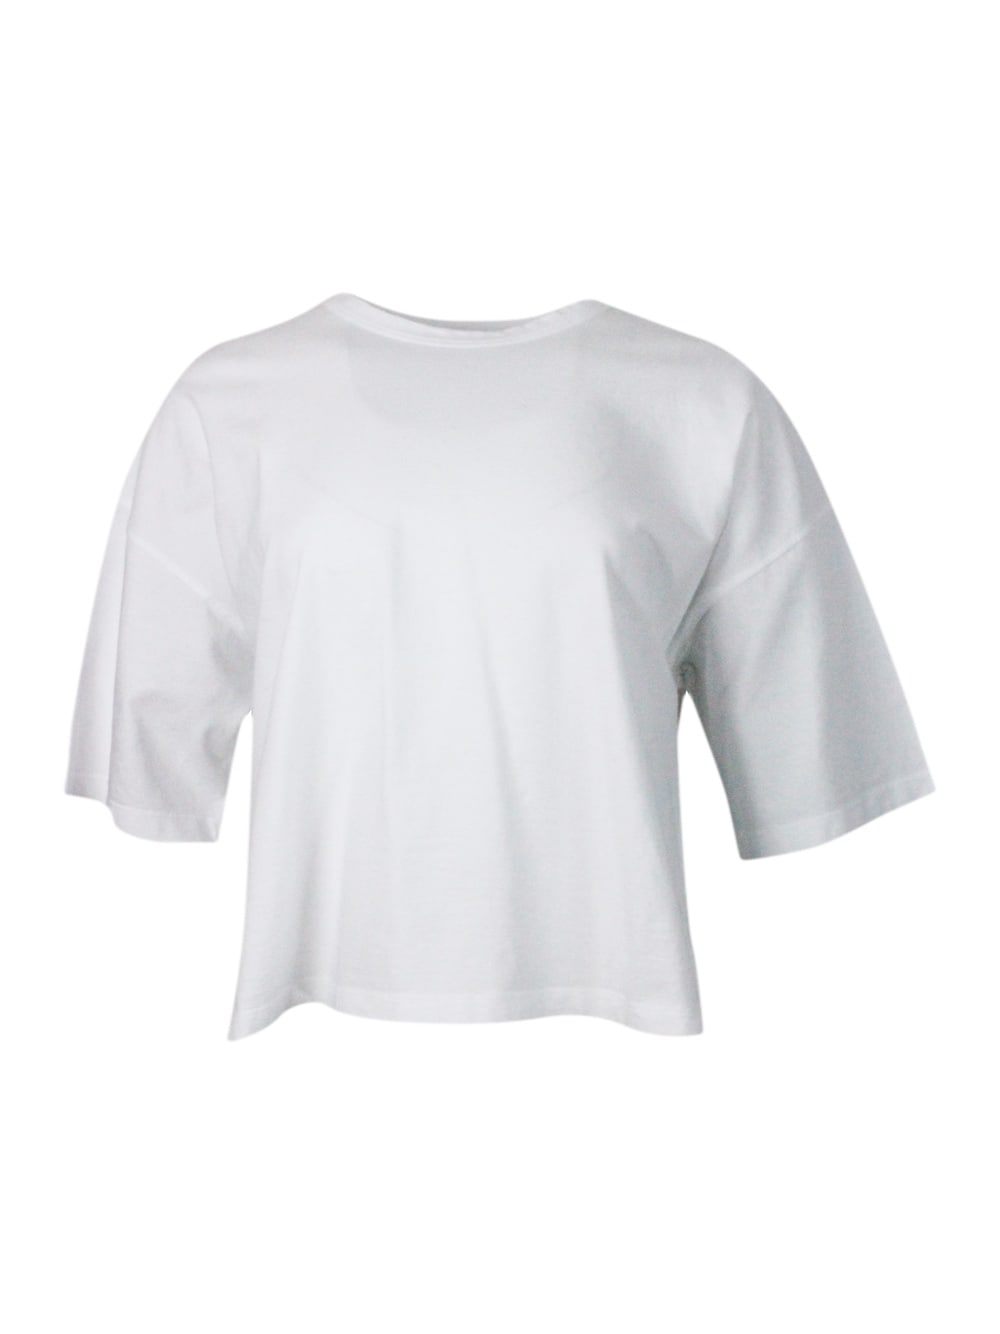 Crew-neck, Short-sleeved T-shirt In 100% Soft Cotton, With An Oversized Fit And Vents On The Sides